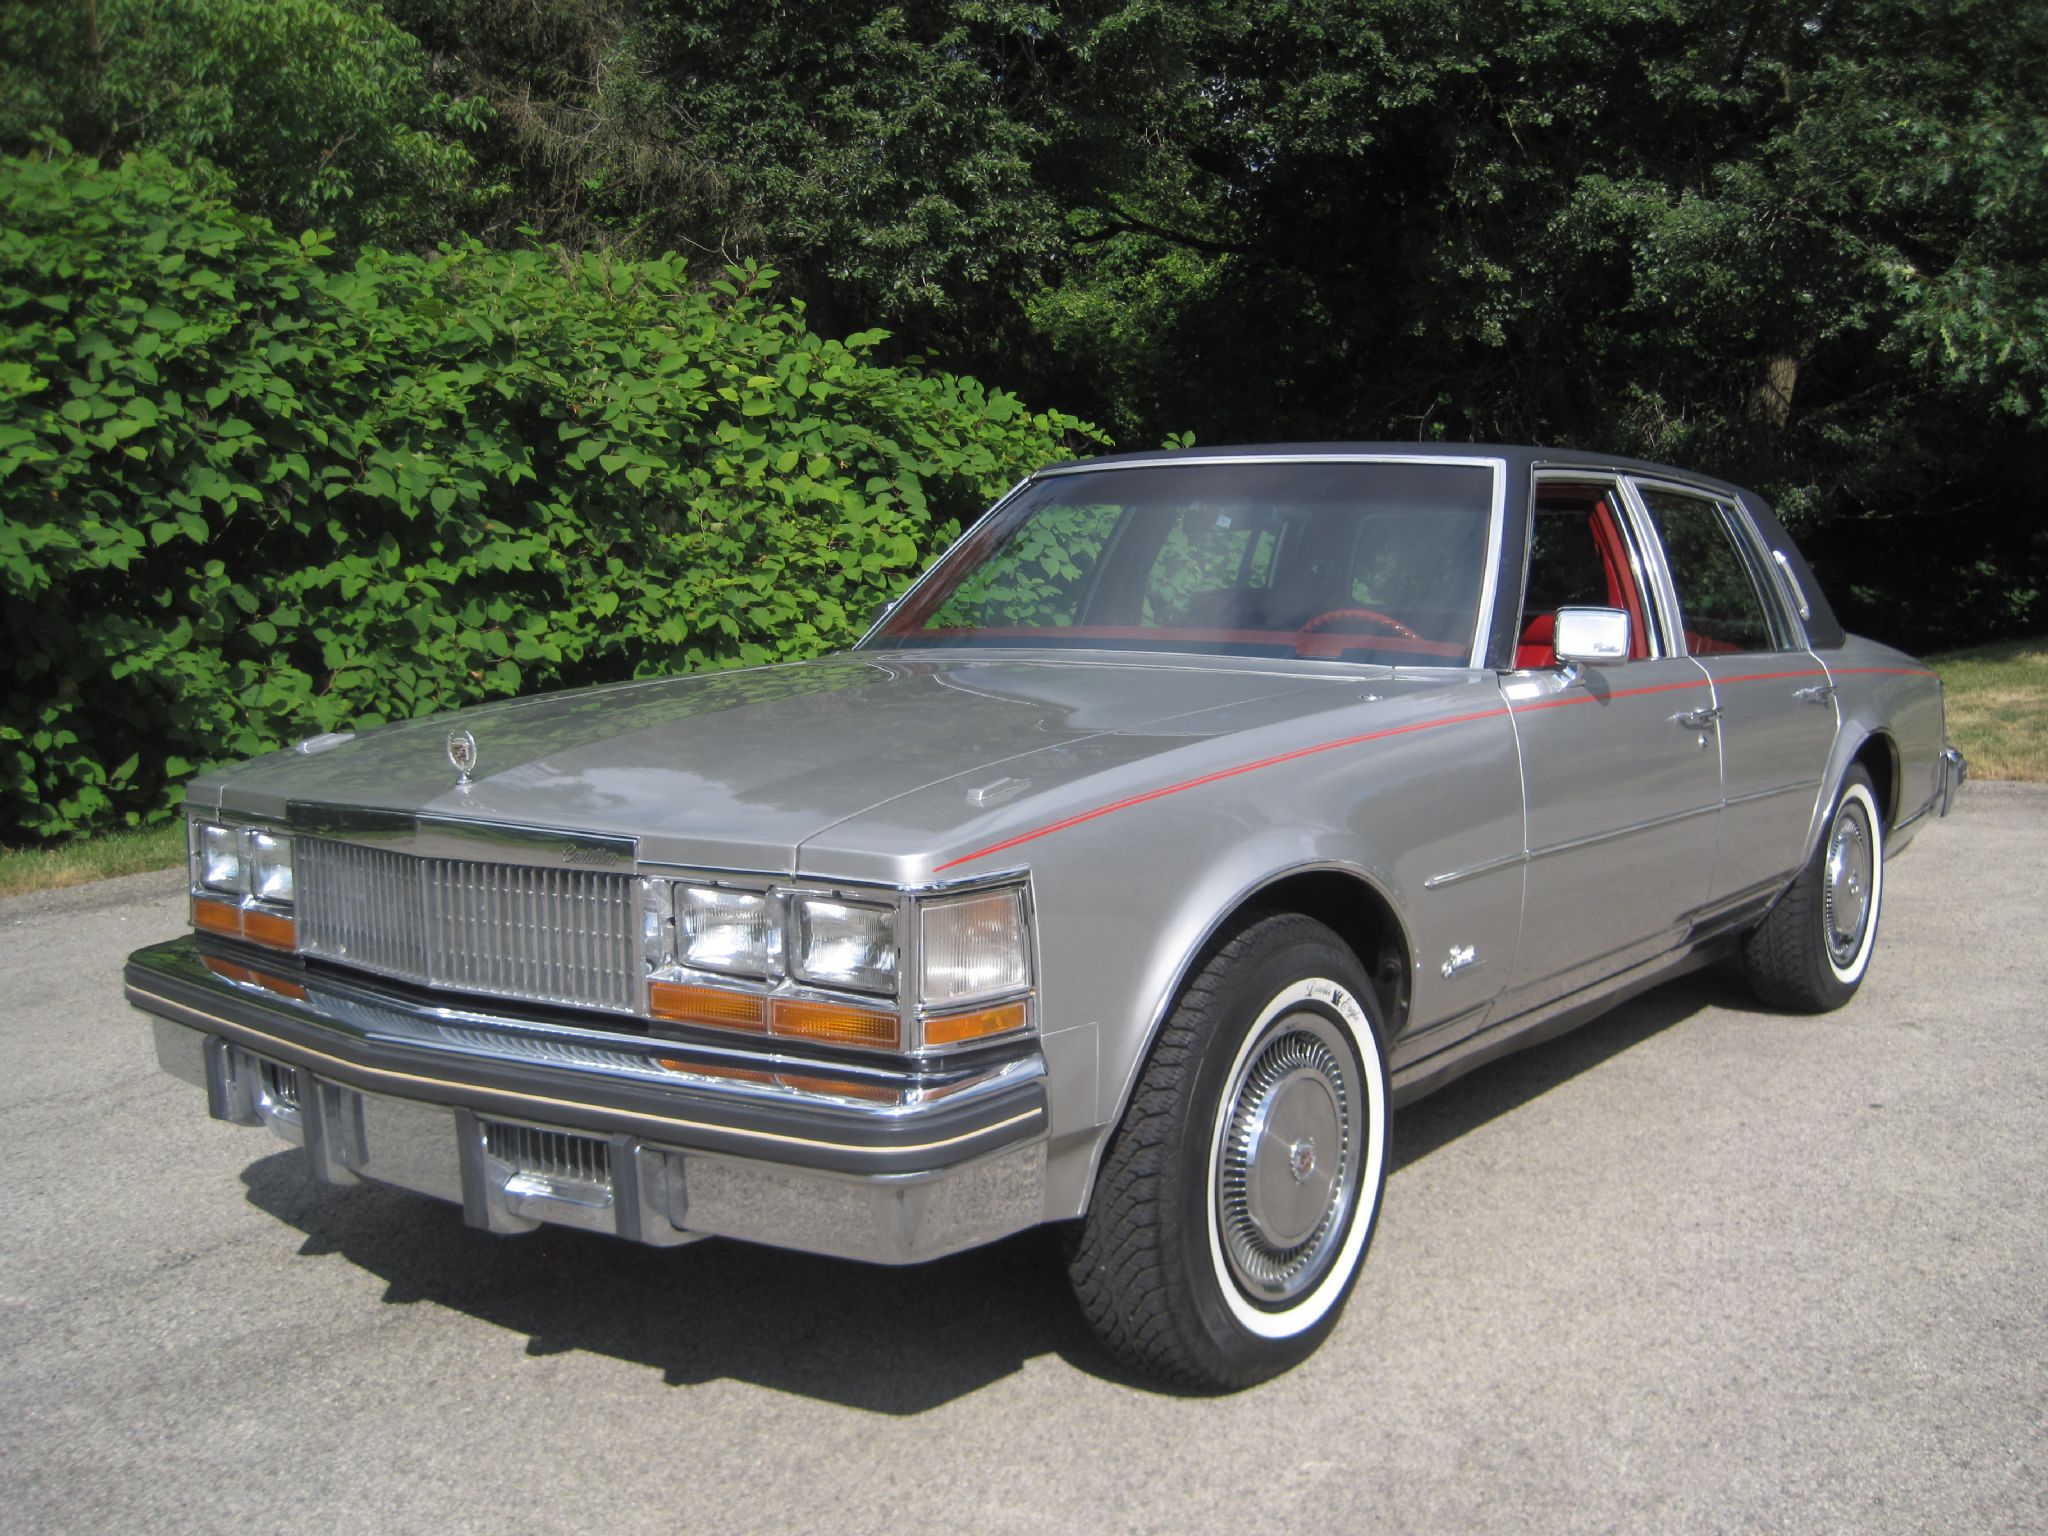  Cadillac Seville - Low Miles, Collector Owned And